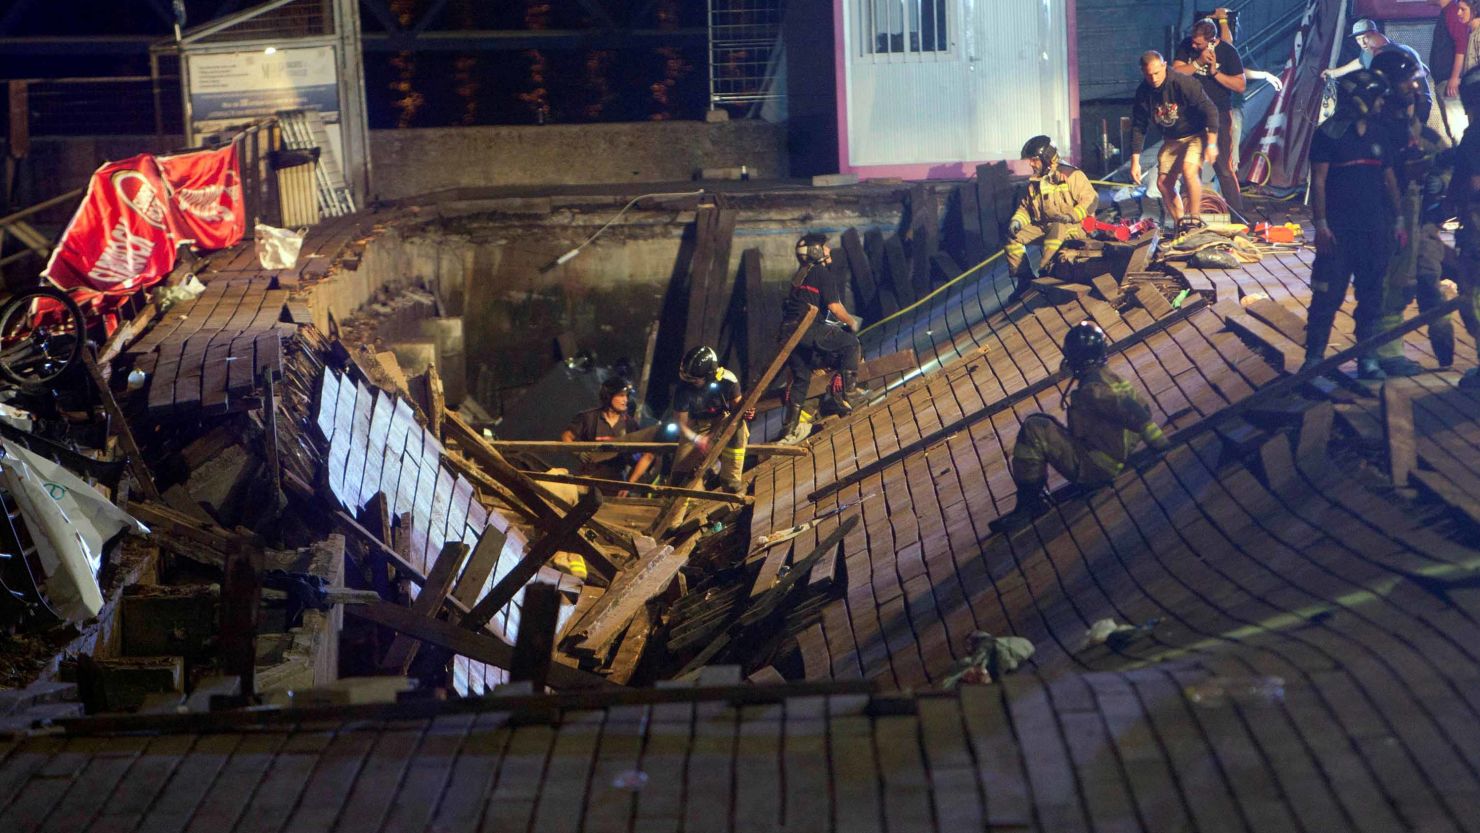 Firefighters search for victims after a wooden platform collapsed during a concert in Vigo late Sunday.